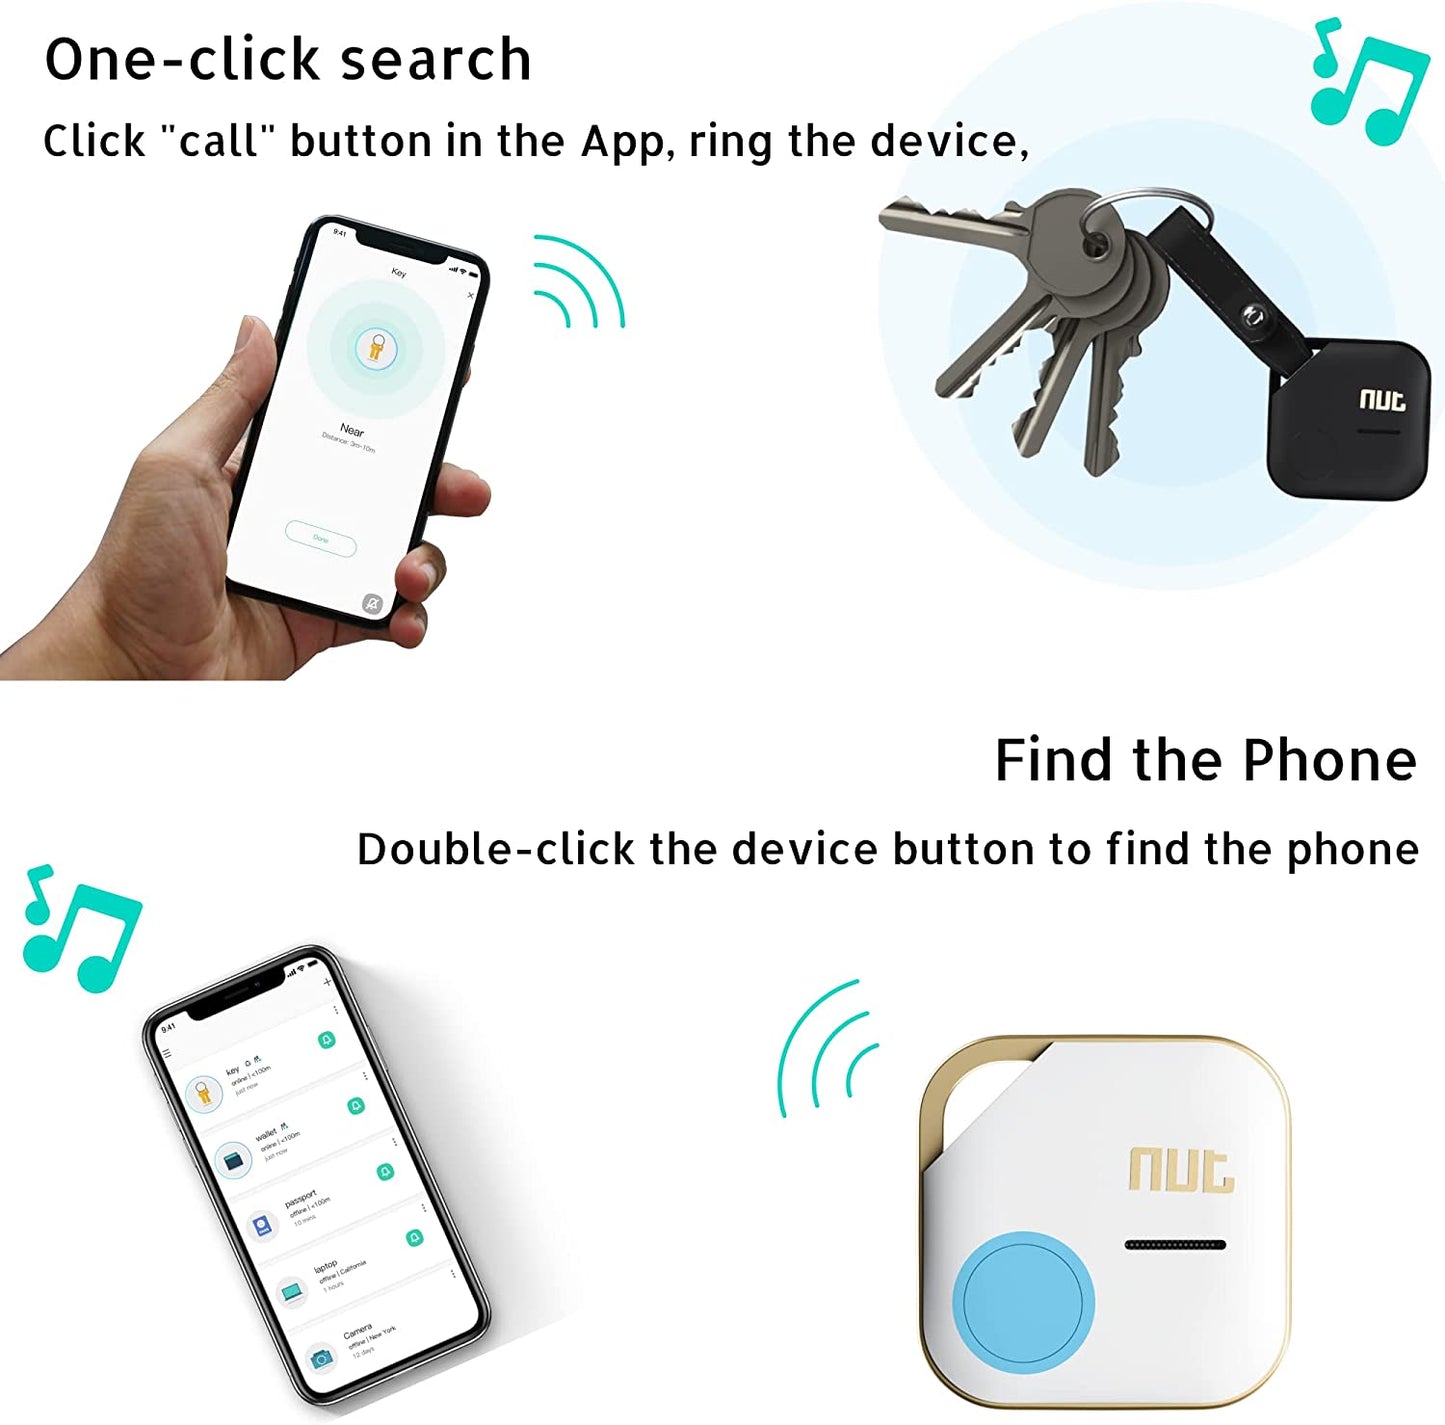 Nutale Key Finder, Bluetooth Tracker Item Locator with Key Chain for Keys Pet Wallets or Backpacks and Tablets, Batteries Include (White & Black, 4 Pack)